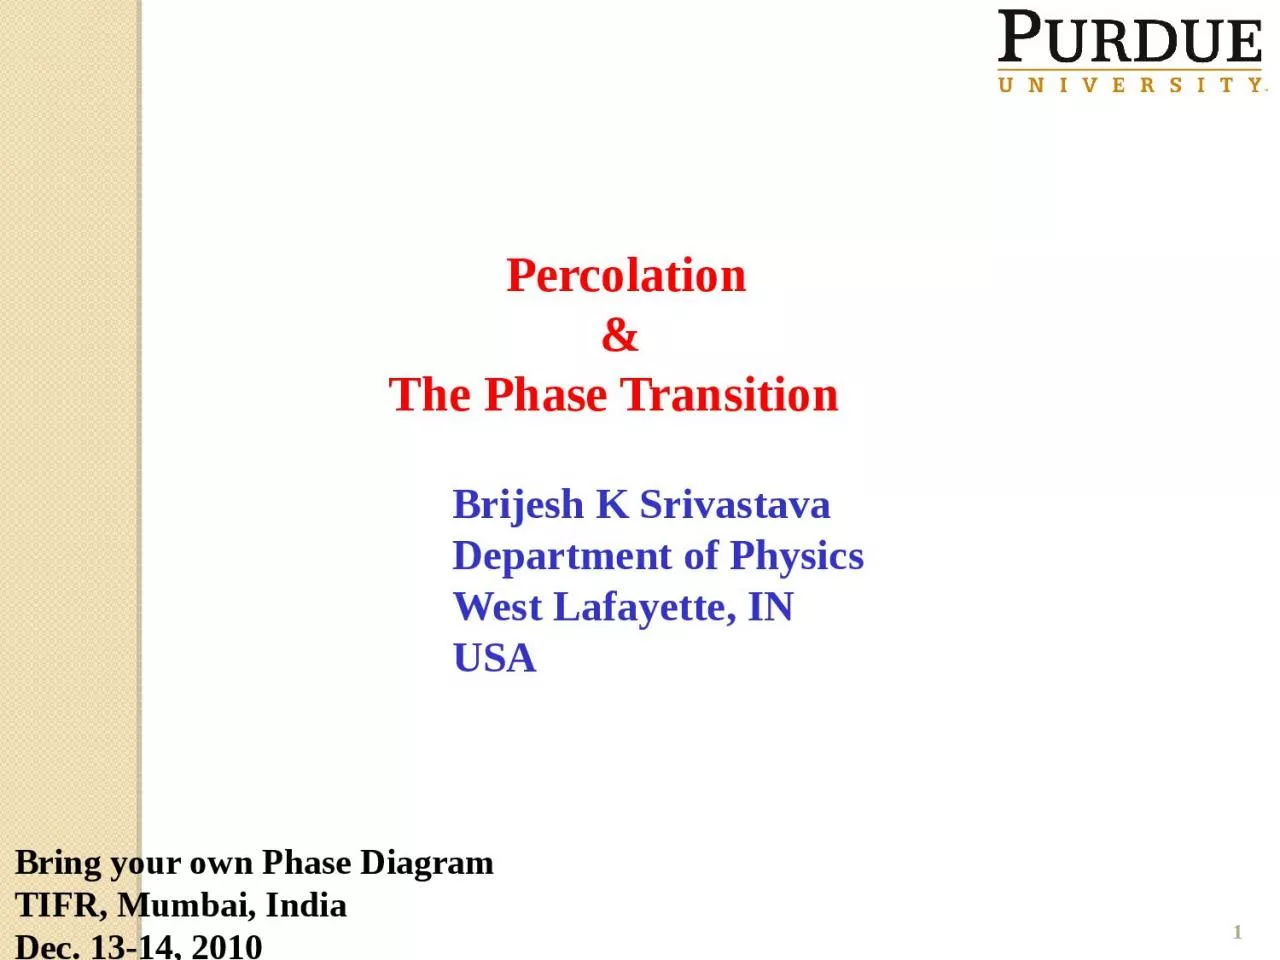 Percolation & The Phase Transition